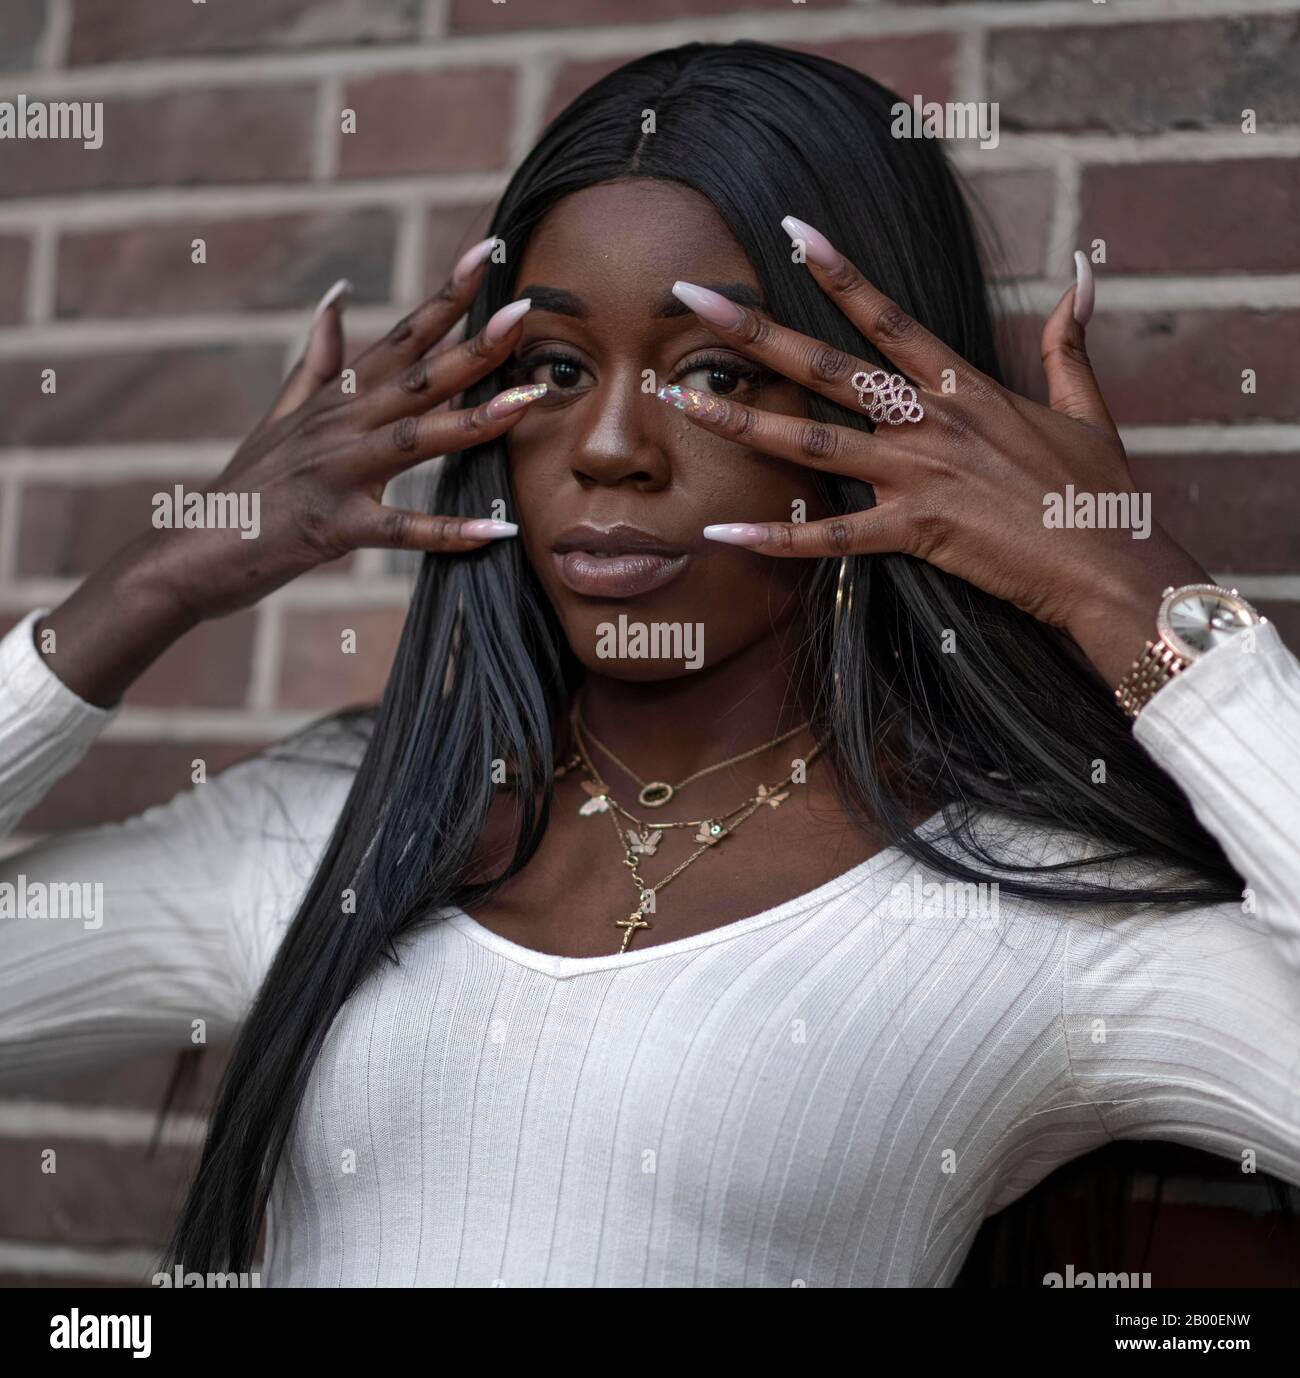 Dark skinned young woman, hands in front of her face, portrait, Duesseldorf, Germany Stock Photo